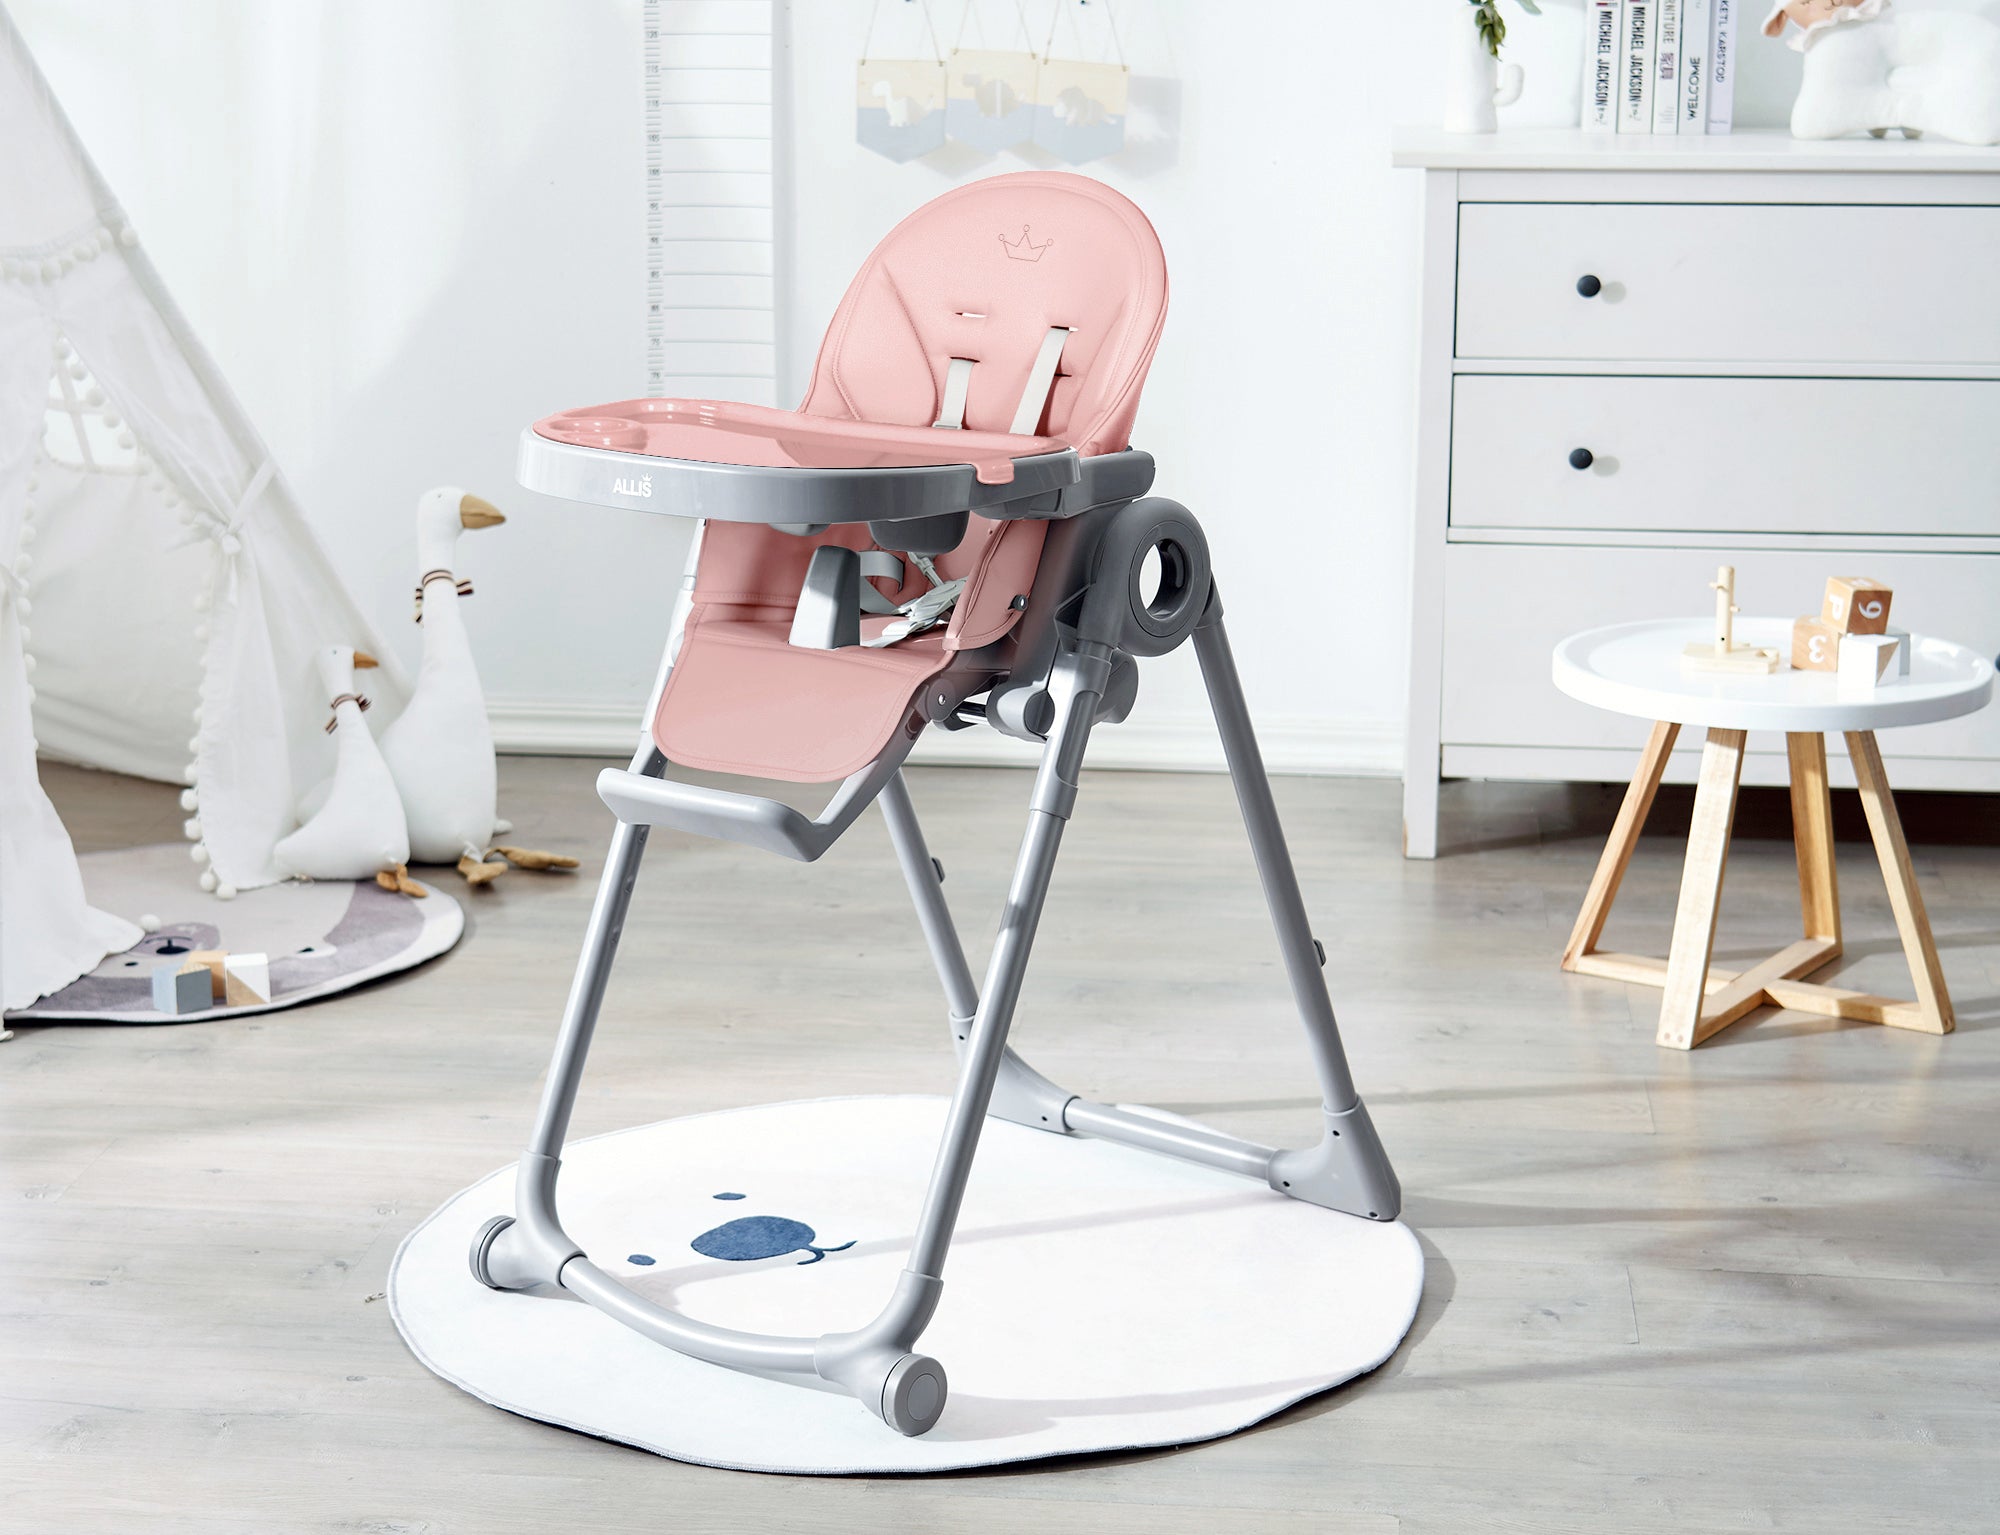 Lola Highchair with Multiple Functions to Support Growth